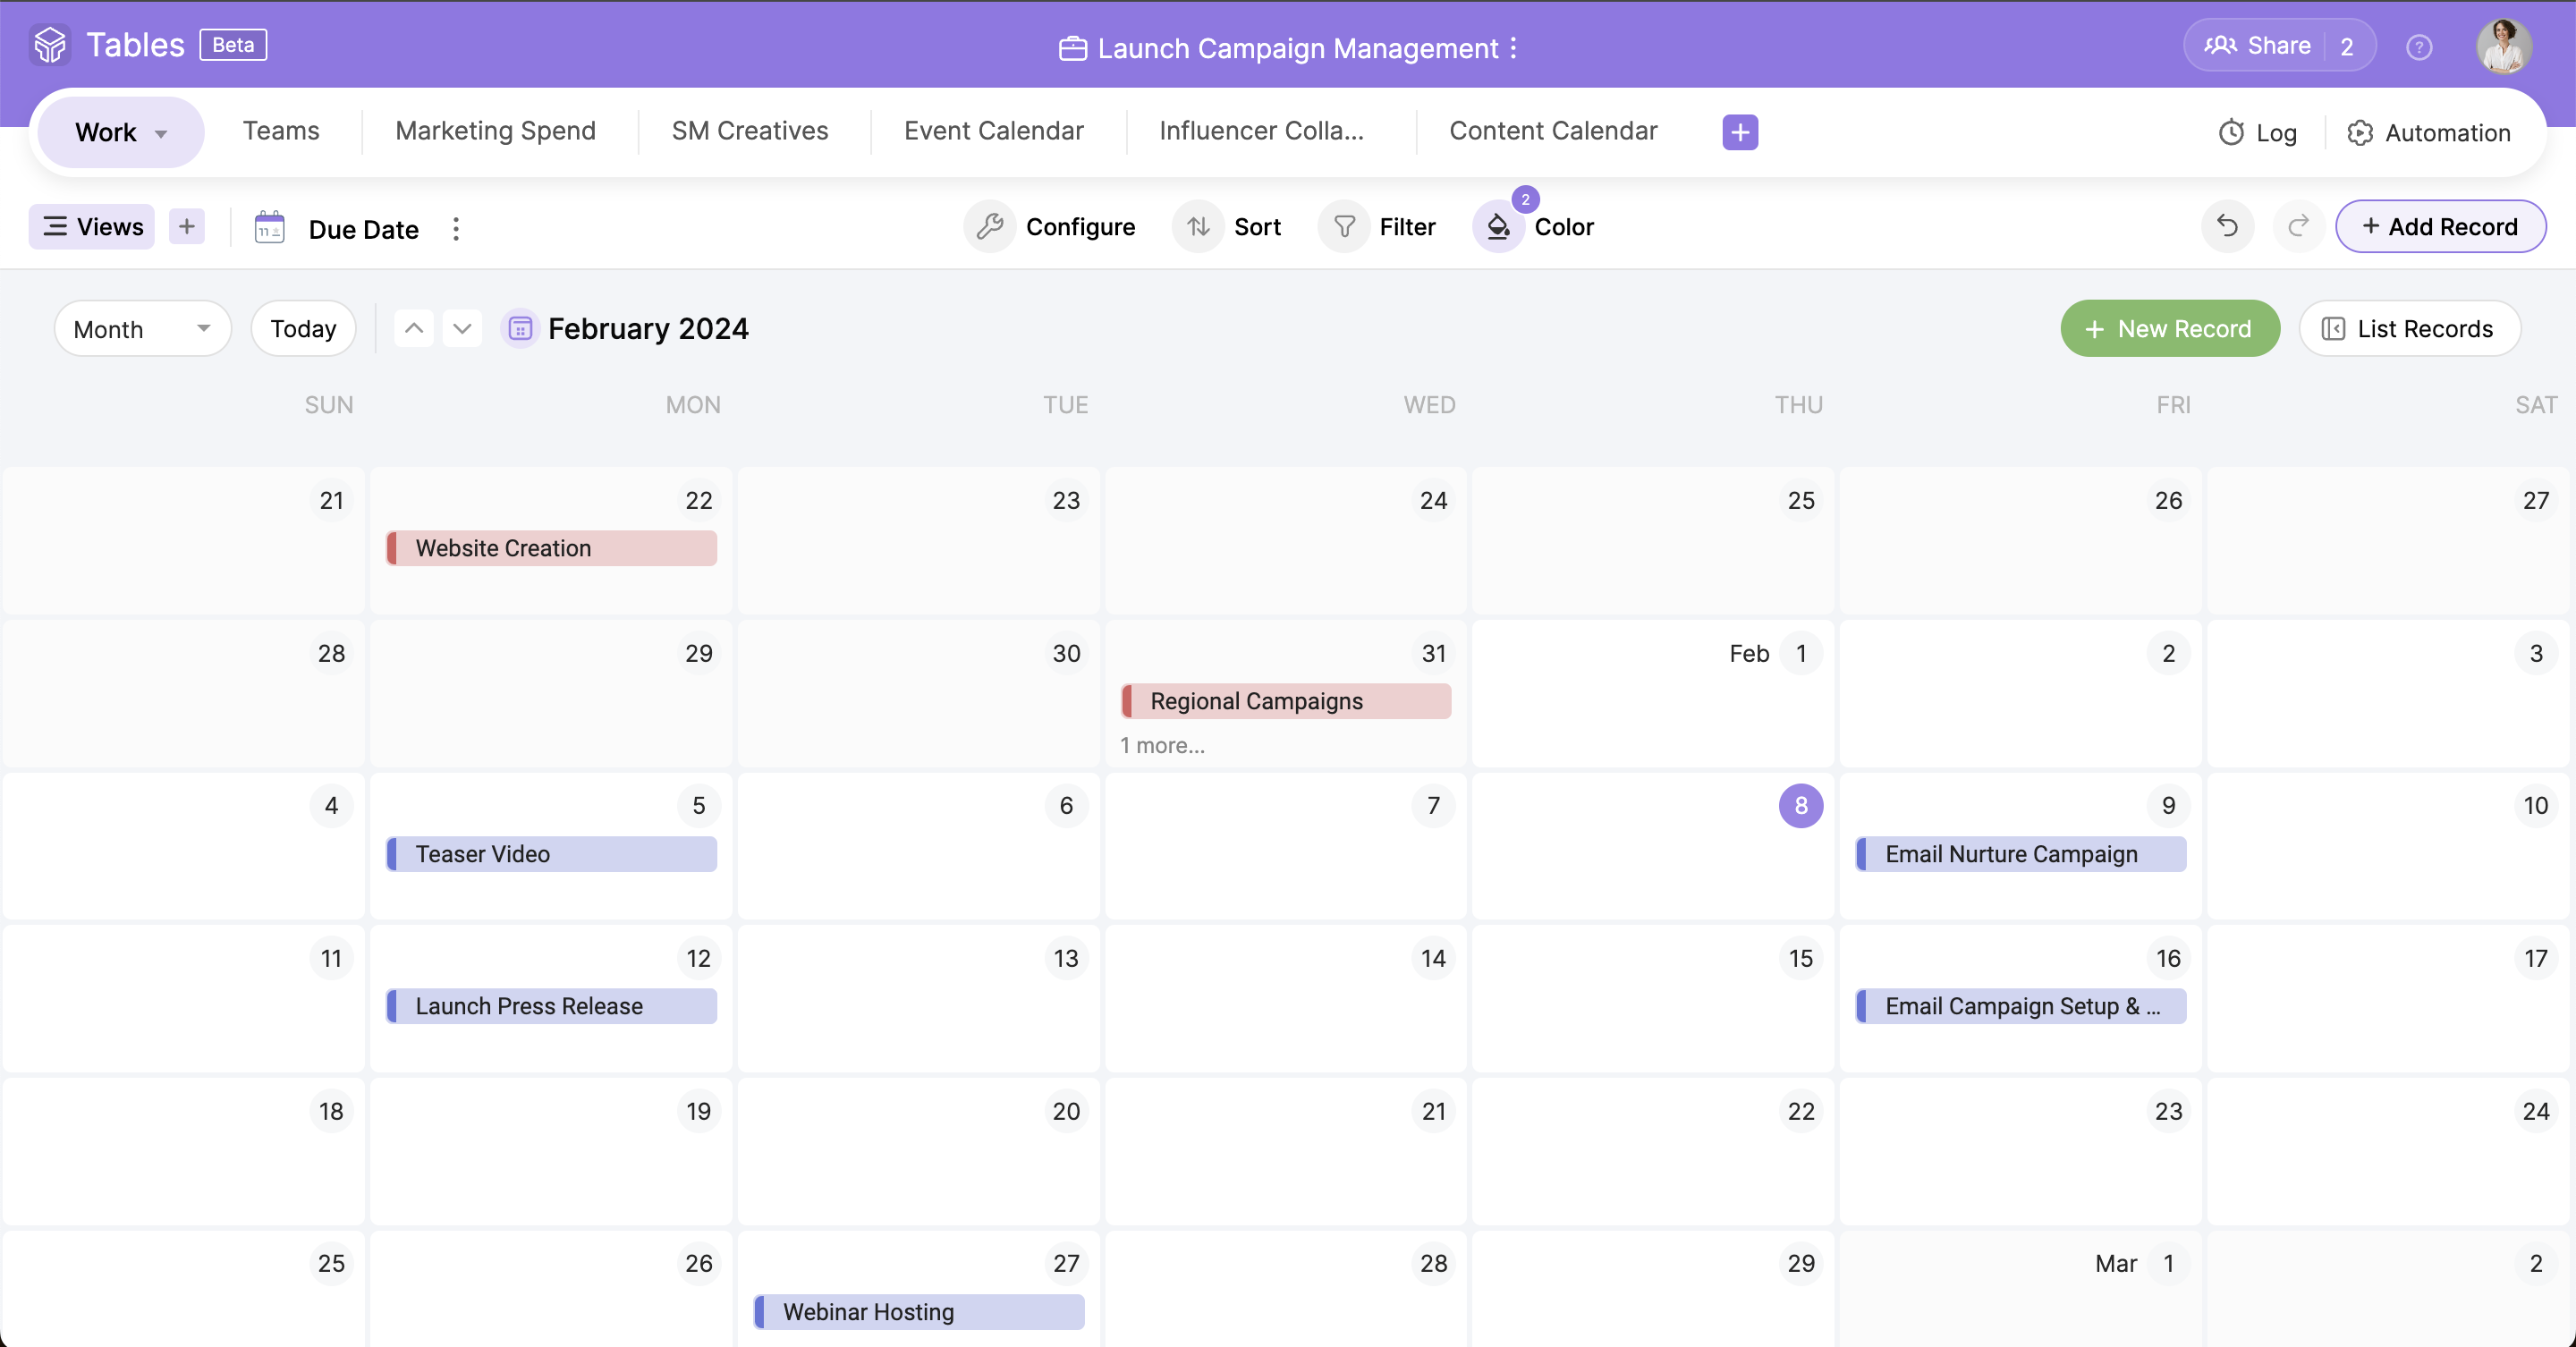 Stay on top of your schedule and eliminate overdues with the Calendar view.